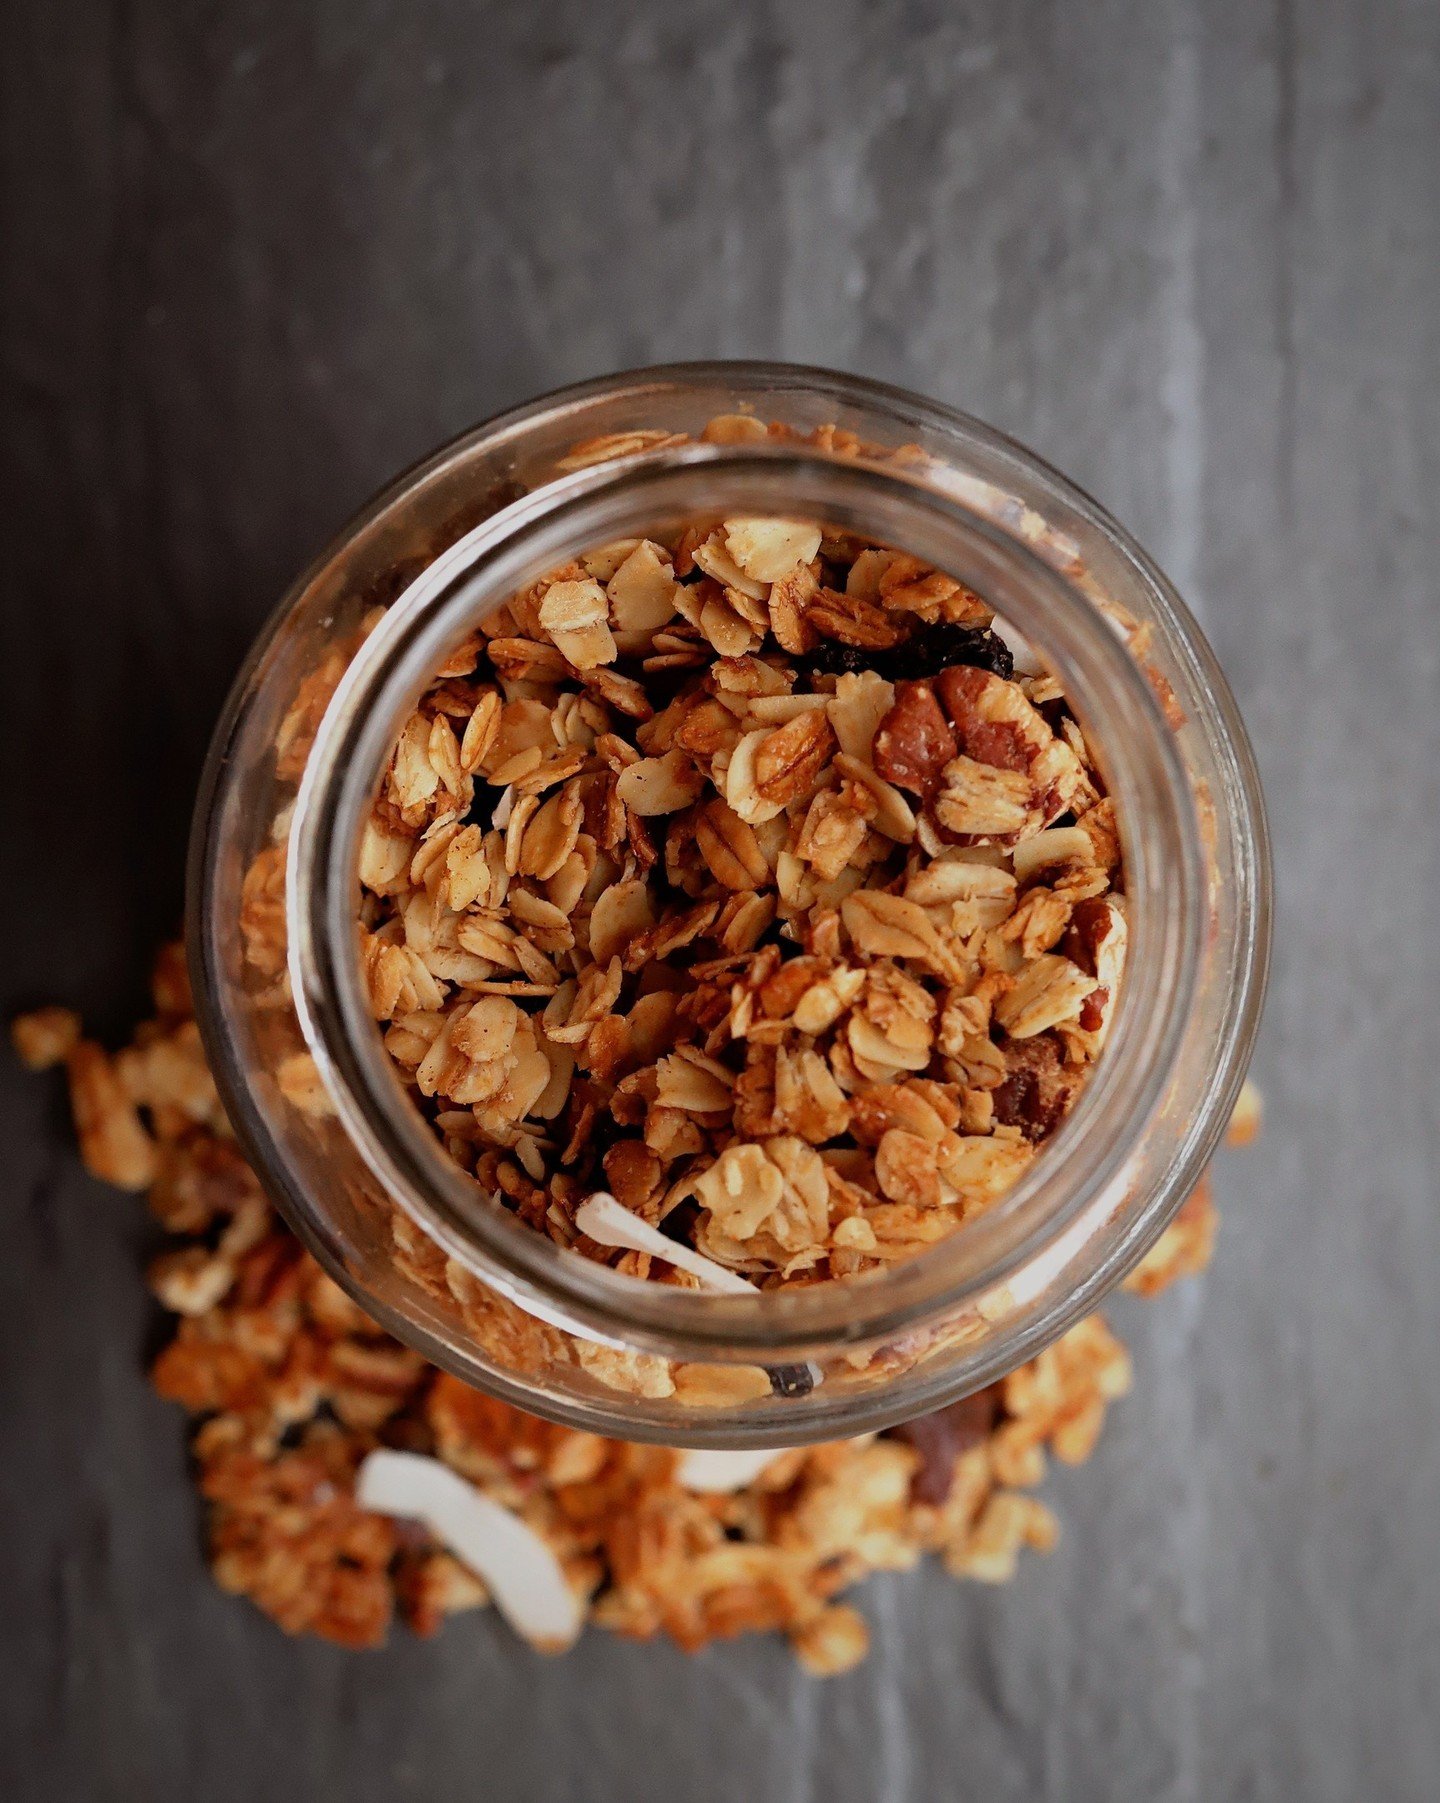 My husband loves my Maple Granola so much that he told me to call it &ldquo;Grandma&rsquo;s Granola&ldquo; because that&rsquo;s what my future grandchildren will call it. He said this recipe will pass down from generation to generation. 

Can&rsquo;t